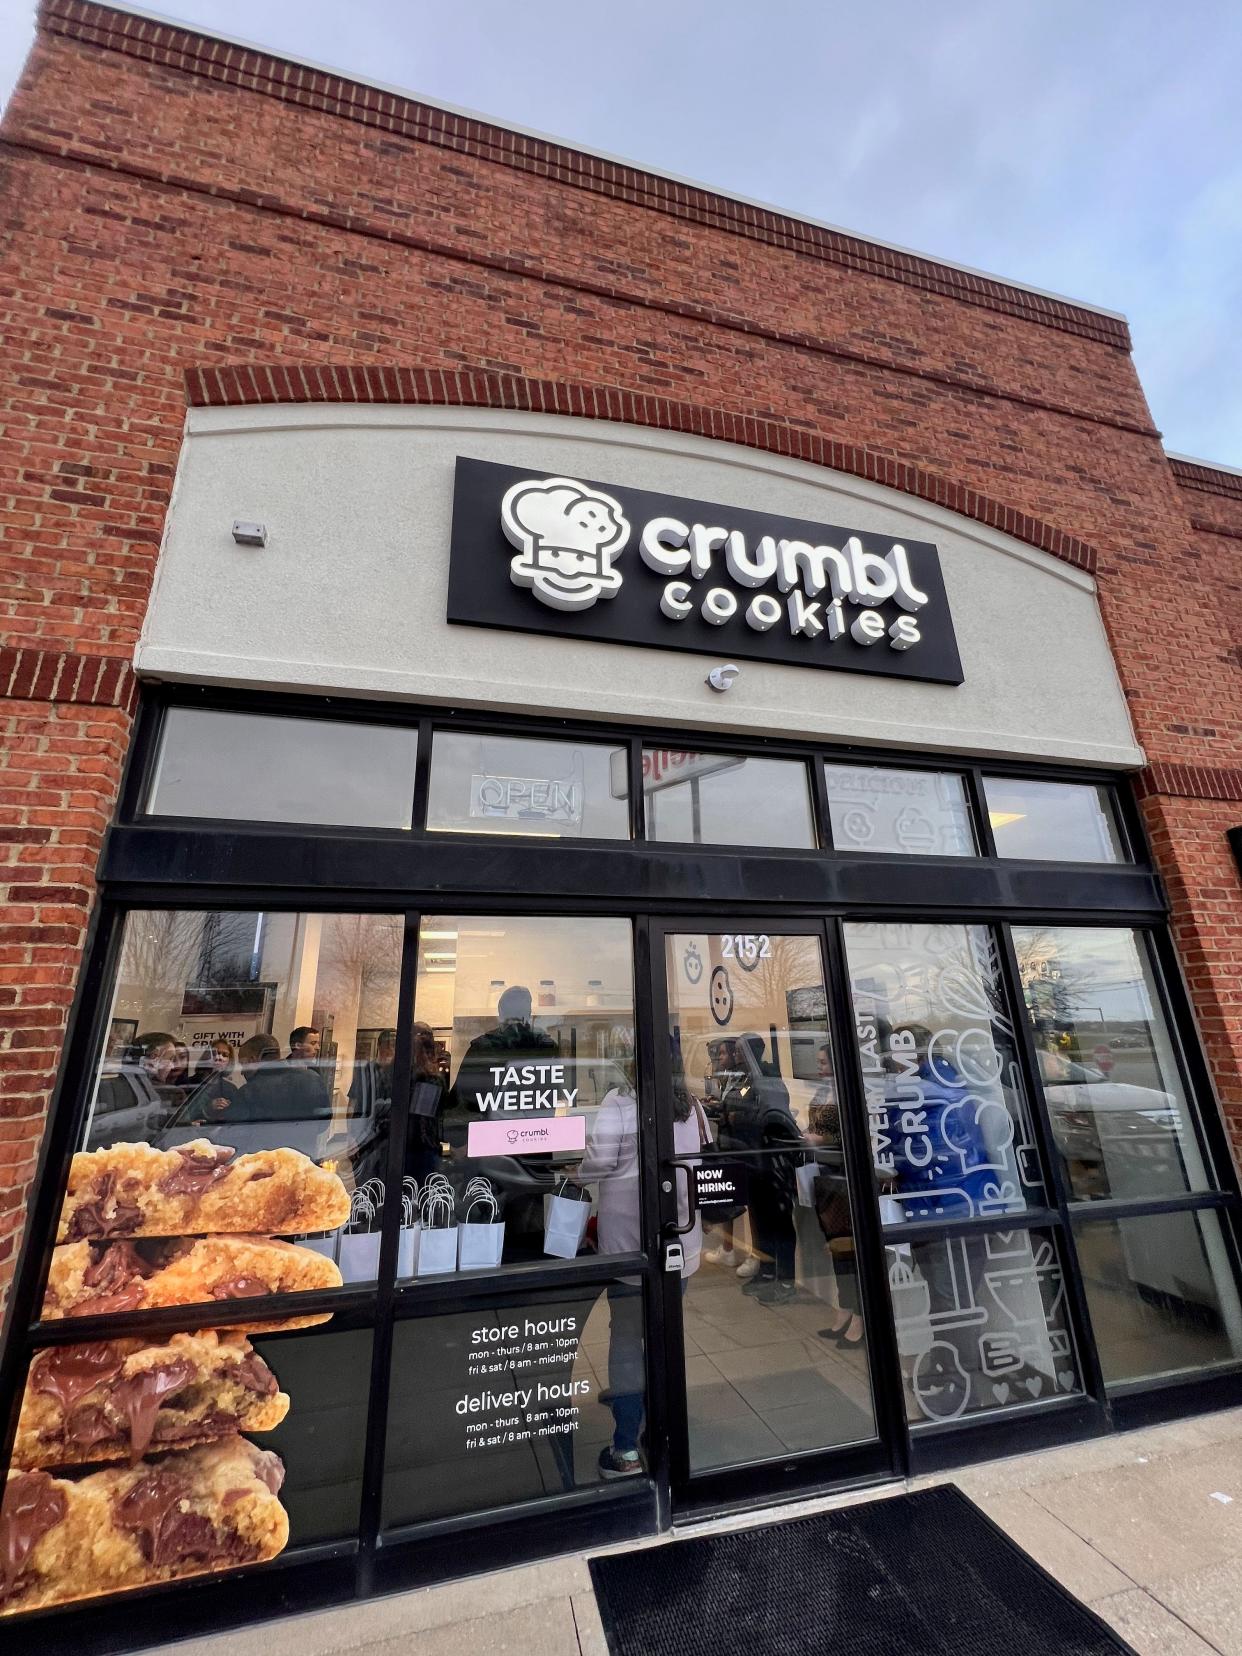 The new Crumbl Cookies location at 2152 Walker Lake Road.